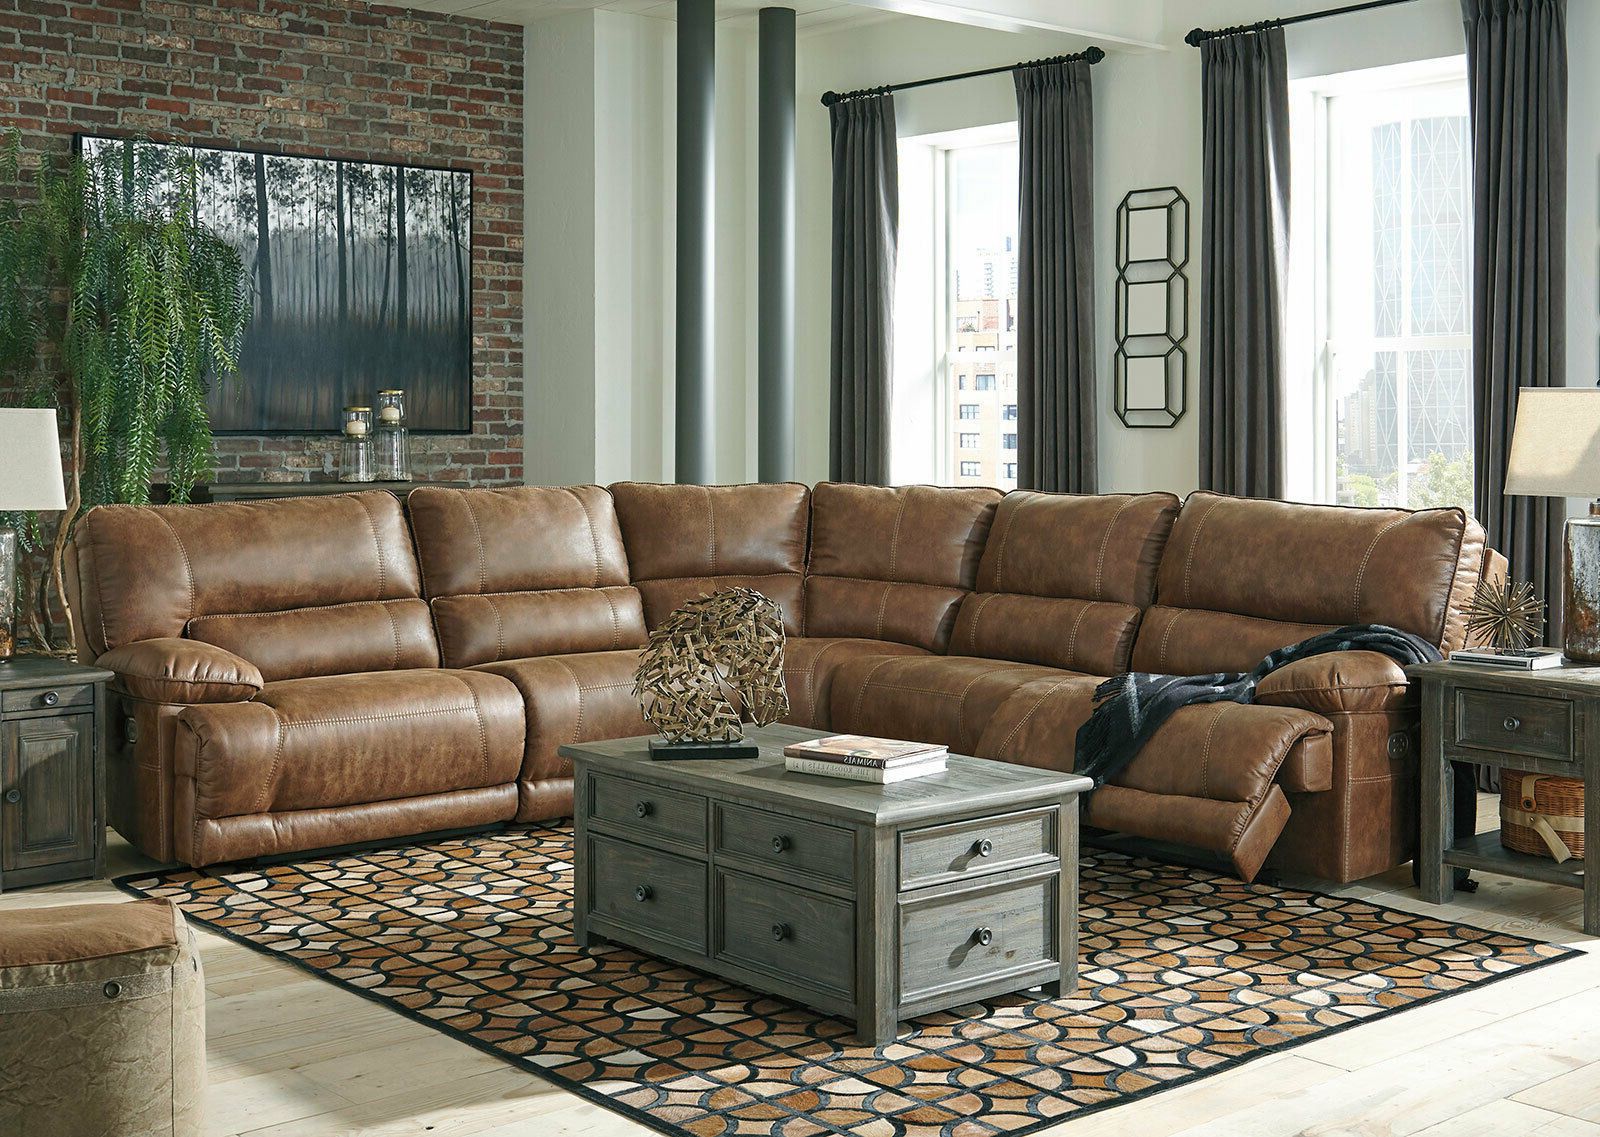 Hamburg 5pcs Sectional Living Room Brown Faux Leather Power Reclining Regarding Faux Leather Sectional Sofa Sets (View 4 of 20)